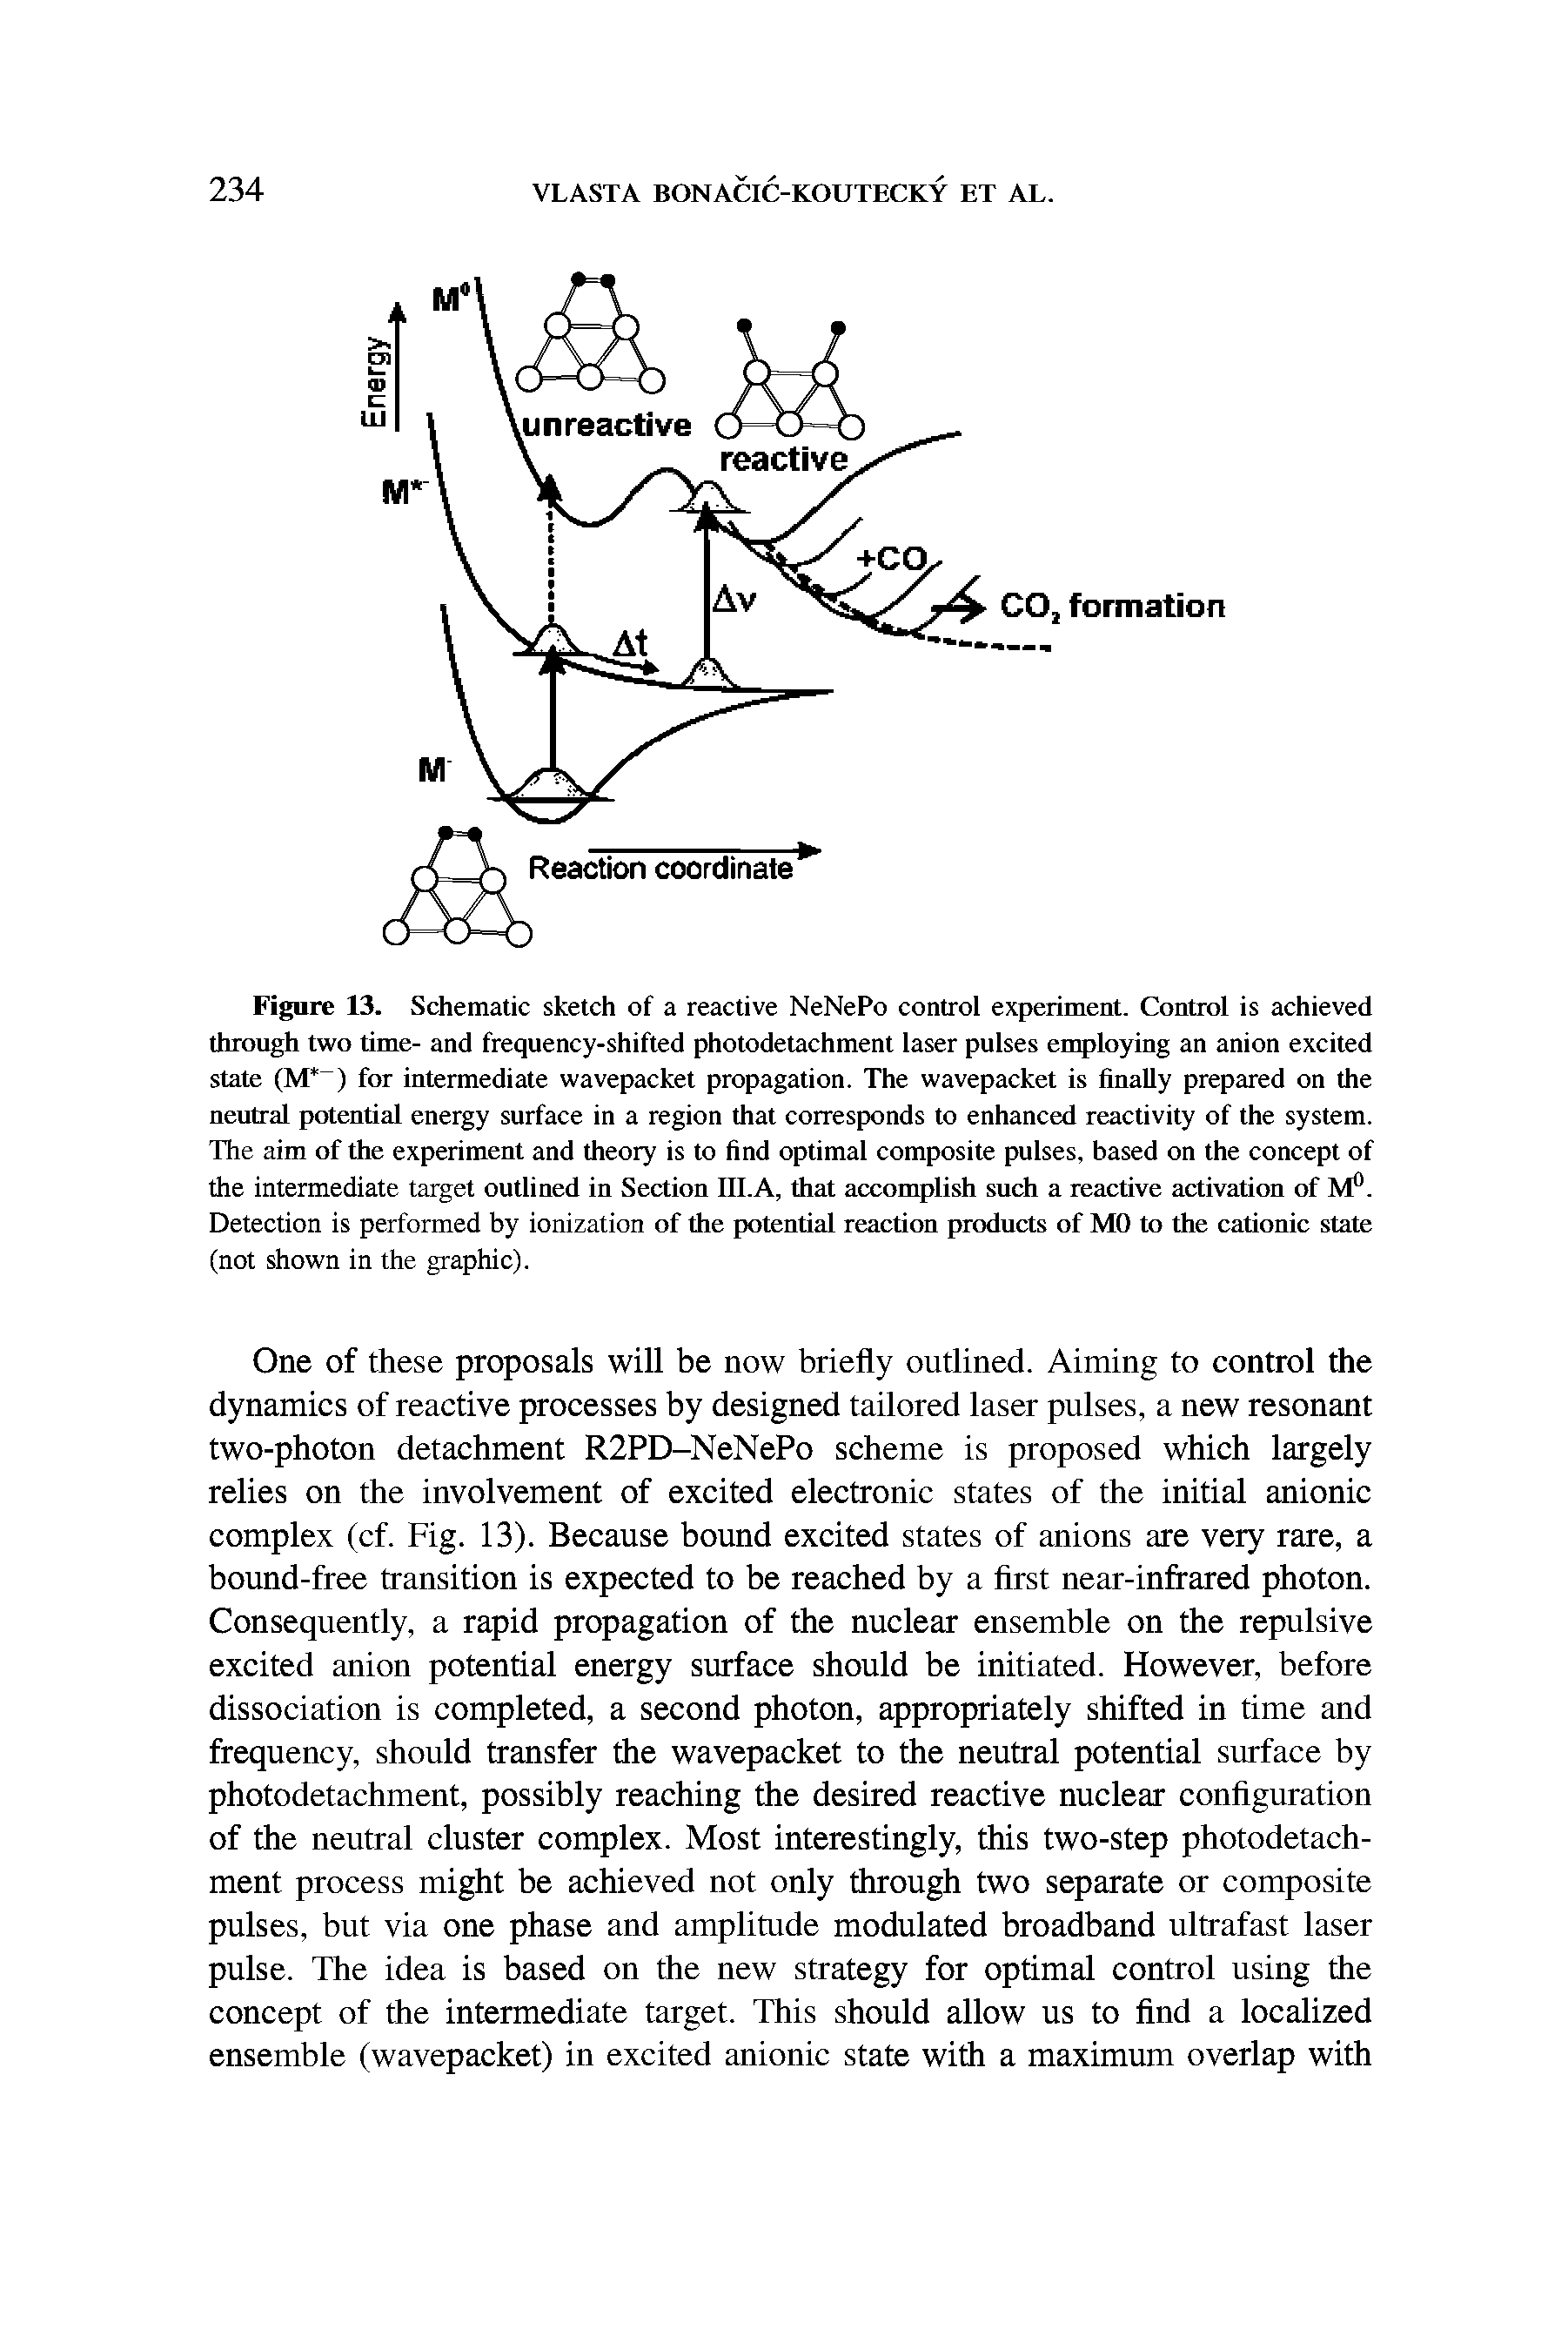 Figure 13. Schematic sketch of a reactive NeNePo control experiment. Control is achieved through two time- and frequency-shifted photodetachment laser pulses employing an anion excited state (M ) for intermediate wavepacket propagation. The wavepacket is finally prepared on the neutral potential energy surface in a region that corresponds to enhanced reactivity of the system. The aim of the experiment and theory is to find optimal composite pulses, based on the concept of the intermediate target outlined in Section III.A, that accomplish such a reactive activation of M . Detection is performed by ionization of the potential reaction products of MO to the cationic state (not shown in the graphic).